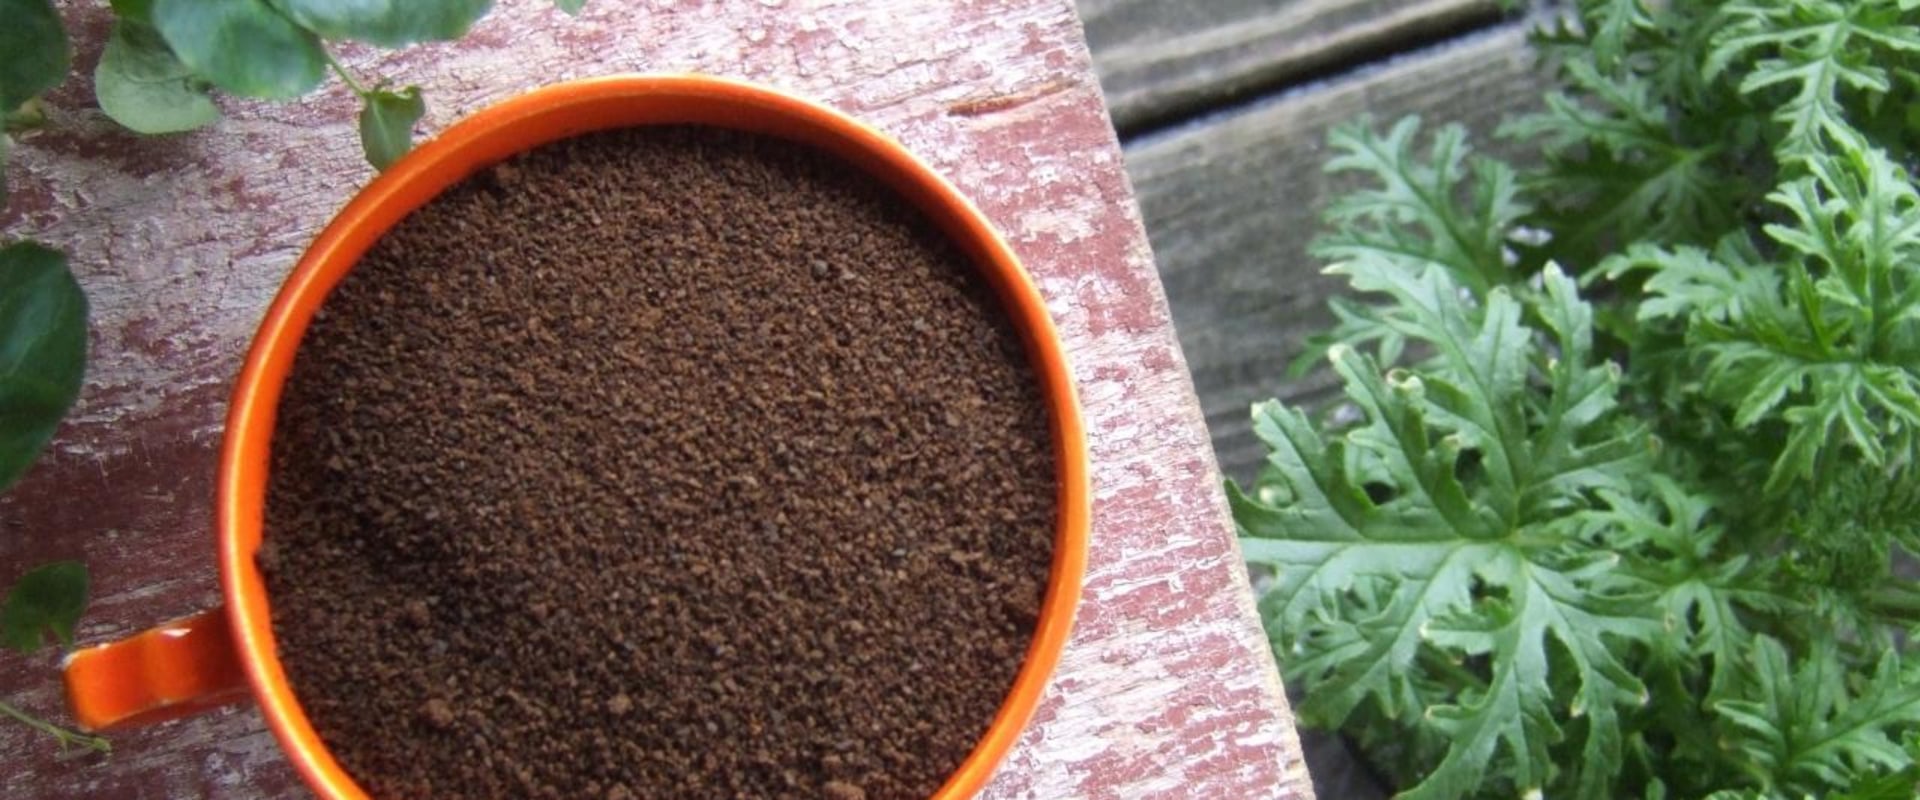 The Benefits and Drawbacks of Using Coffee Grounds as Fertilizer